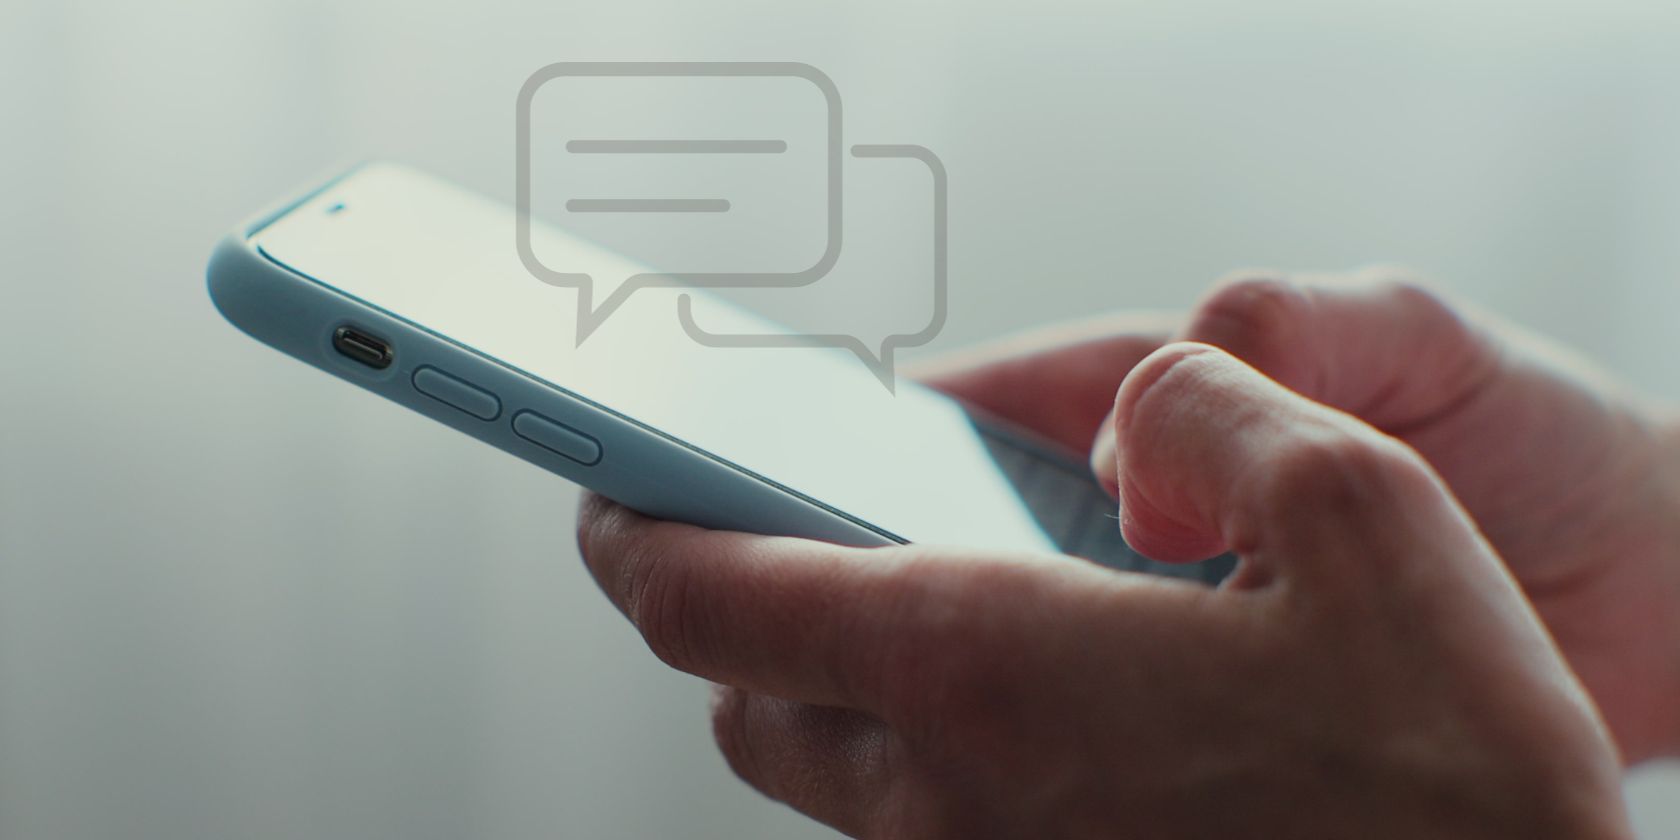 Still Using SMS? You Should Stop: Here's Why